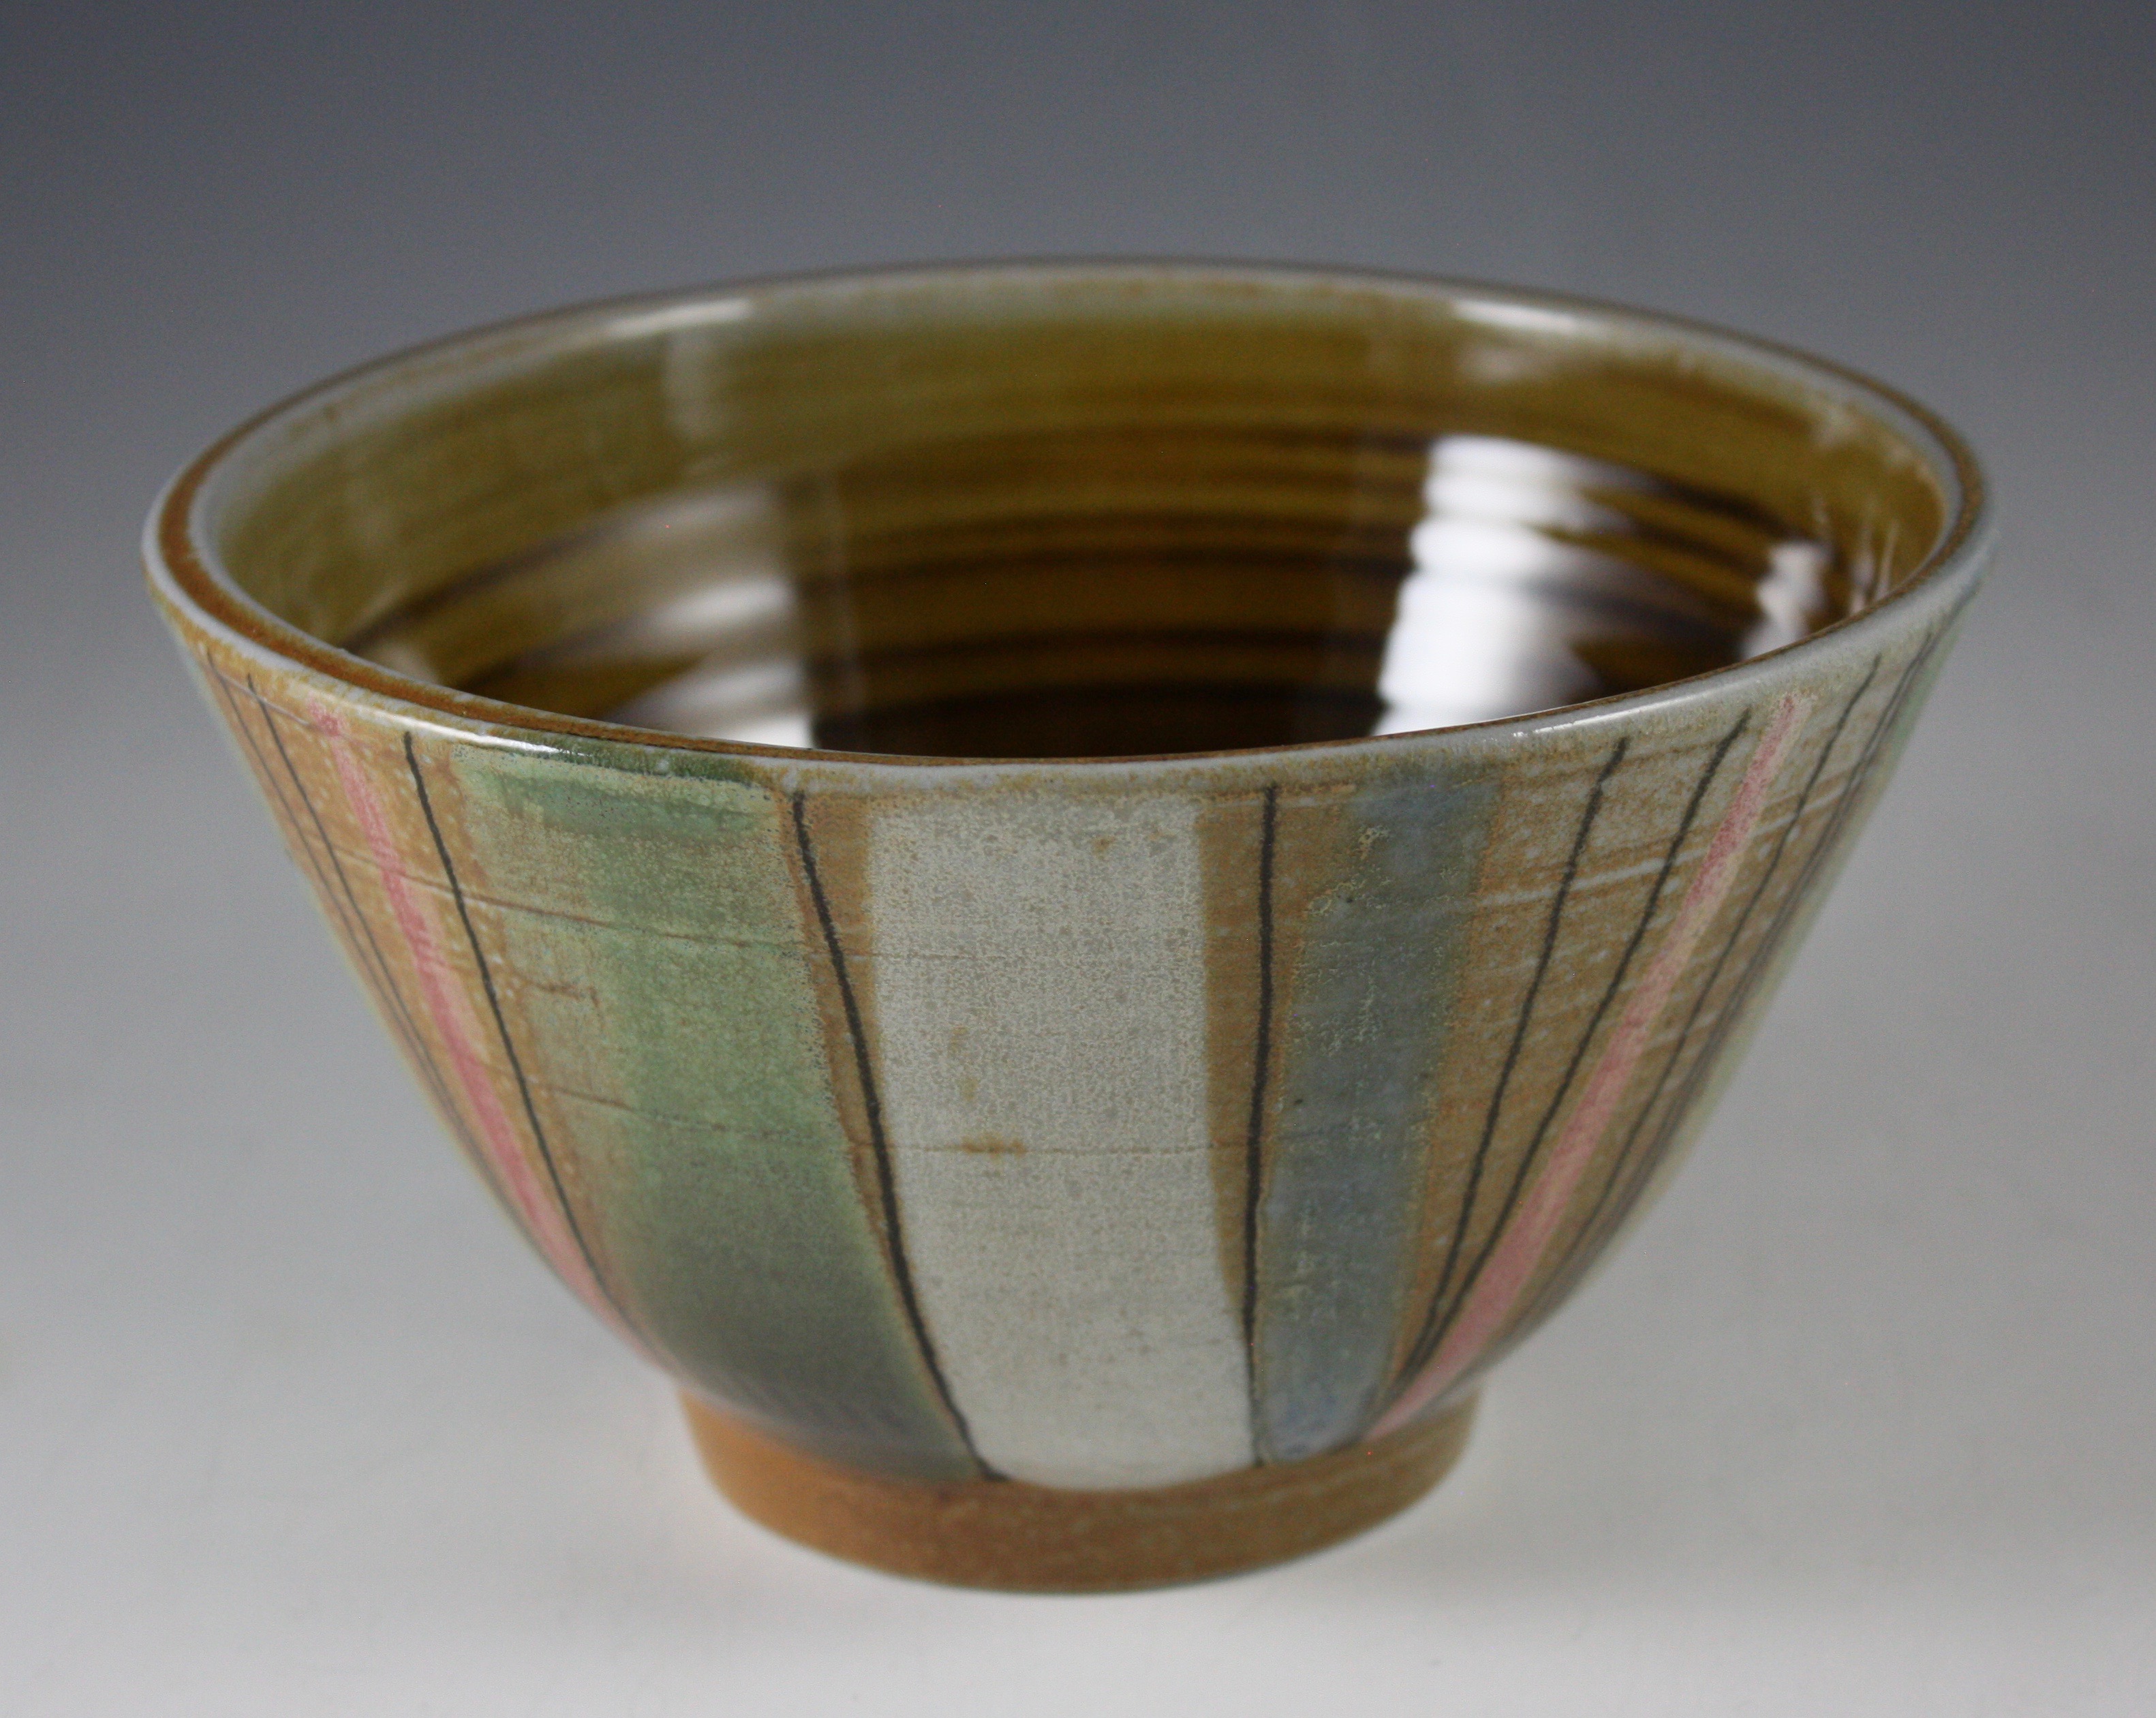 Bowl with Stripes 21-210